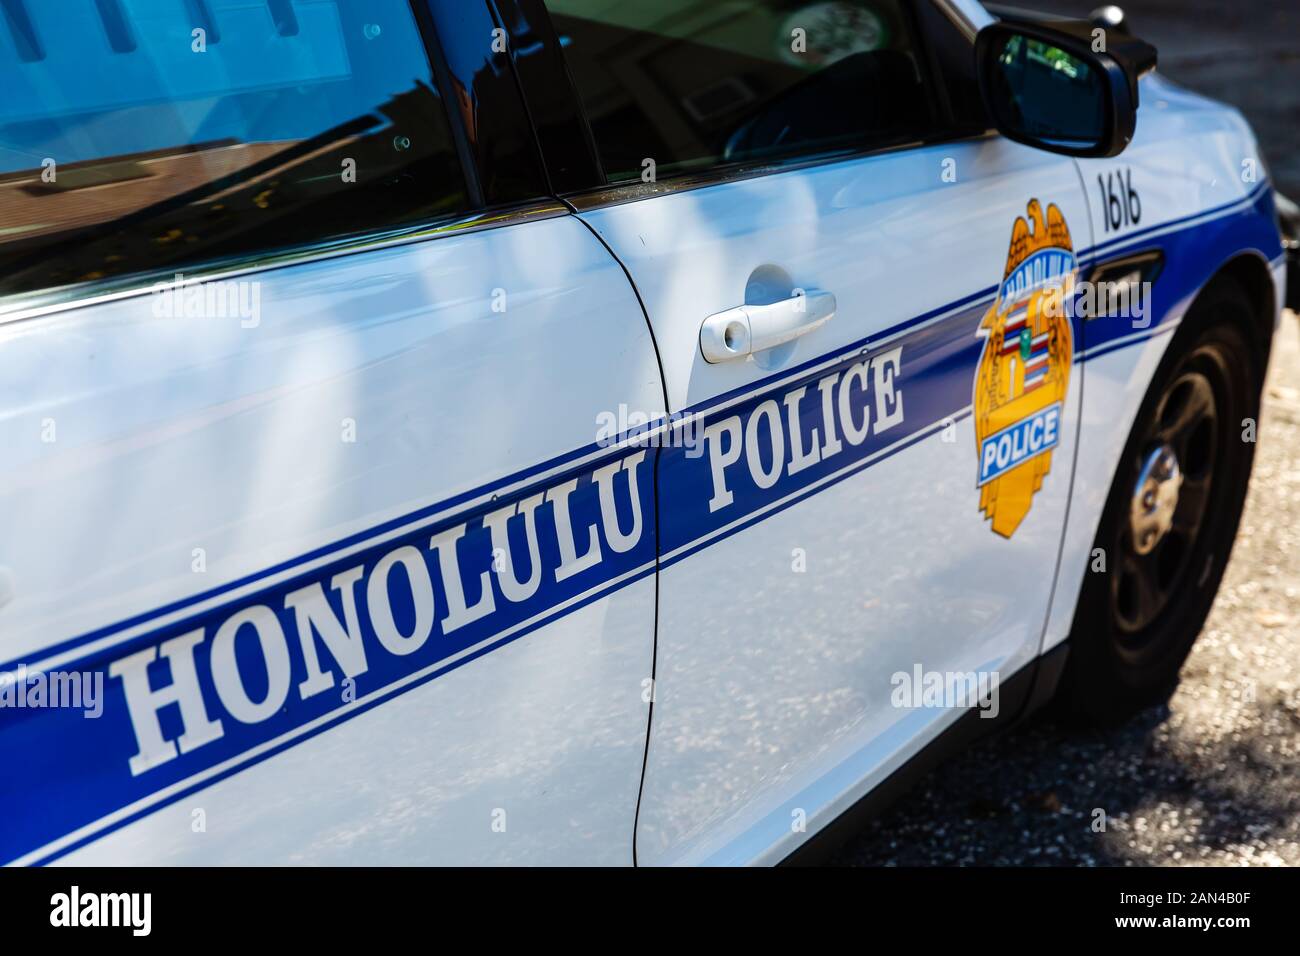 Honolulu, Oahu, Hawaii - November 04, 2019: Police car of the Honolulu Police Department. The HPD has more than 2500 employees and serves the entire i Stock Photo